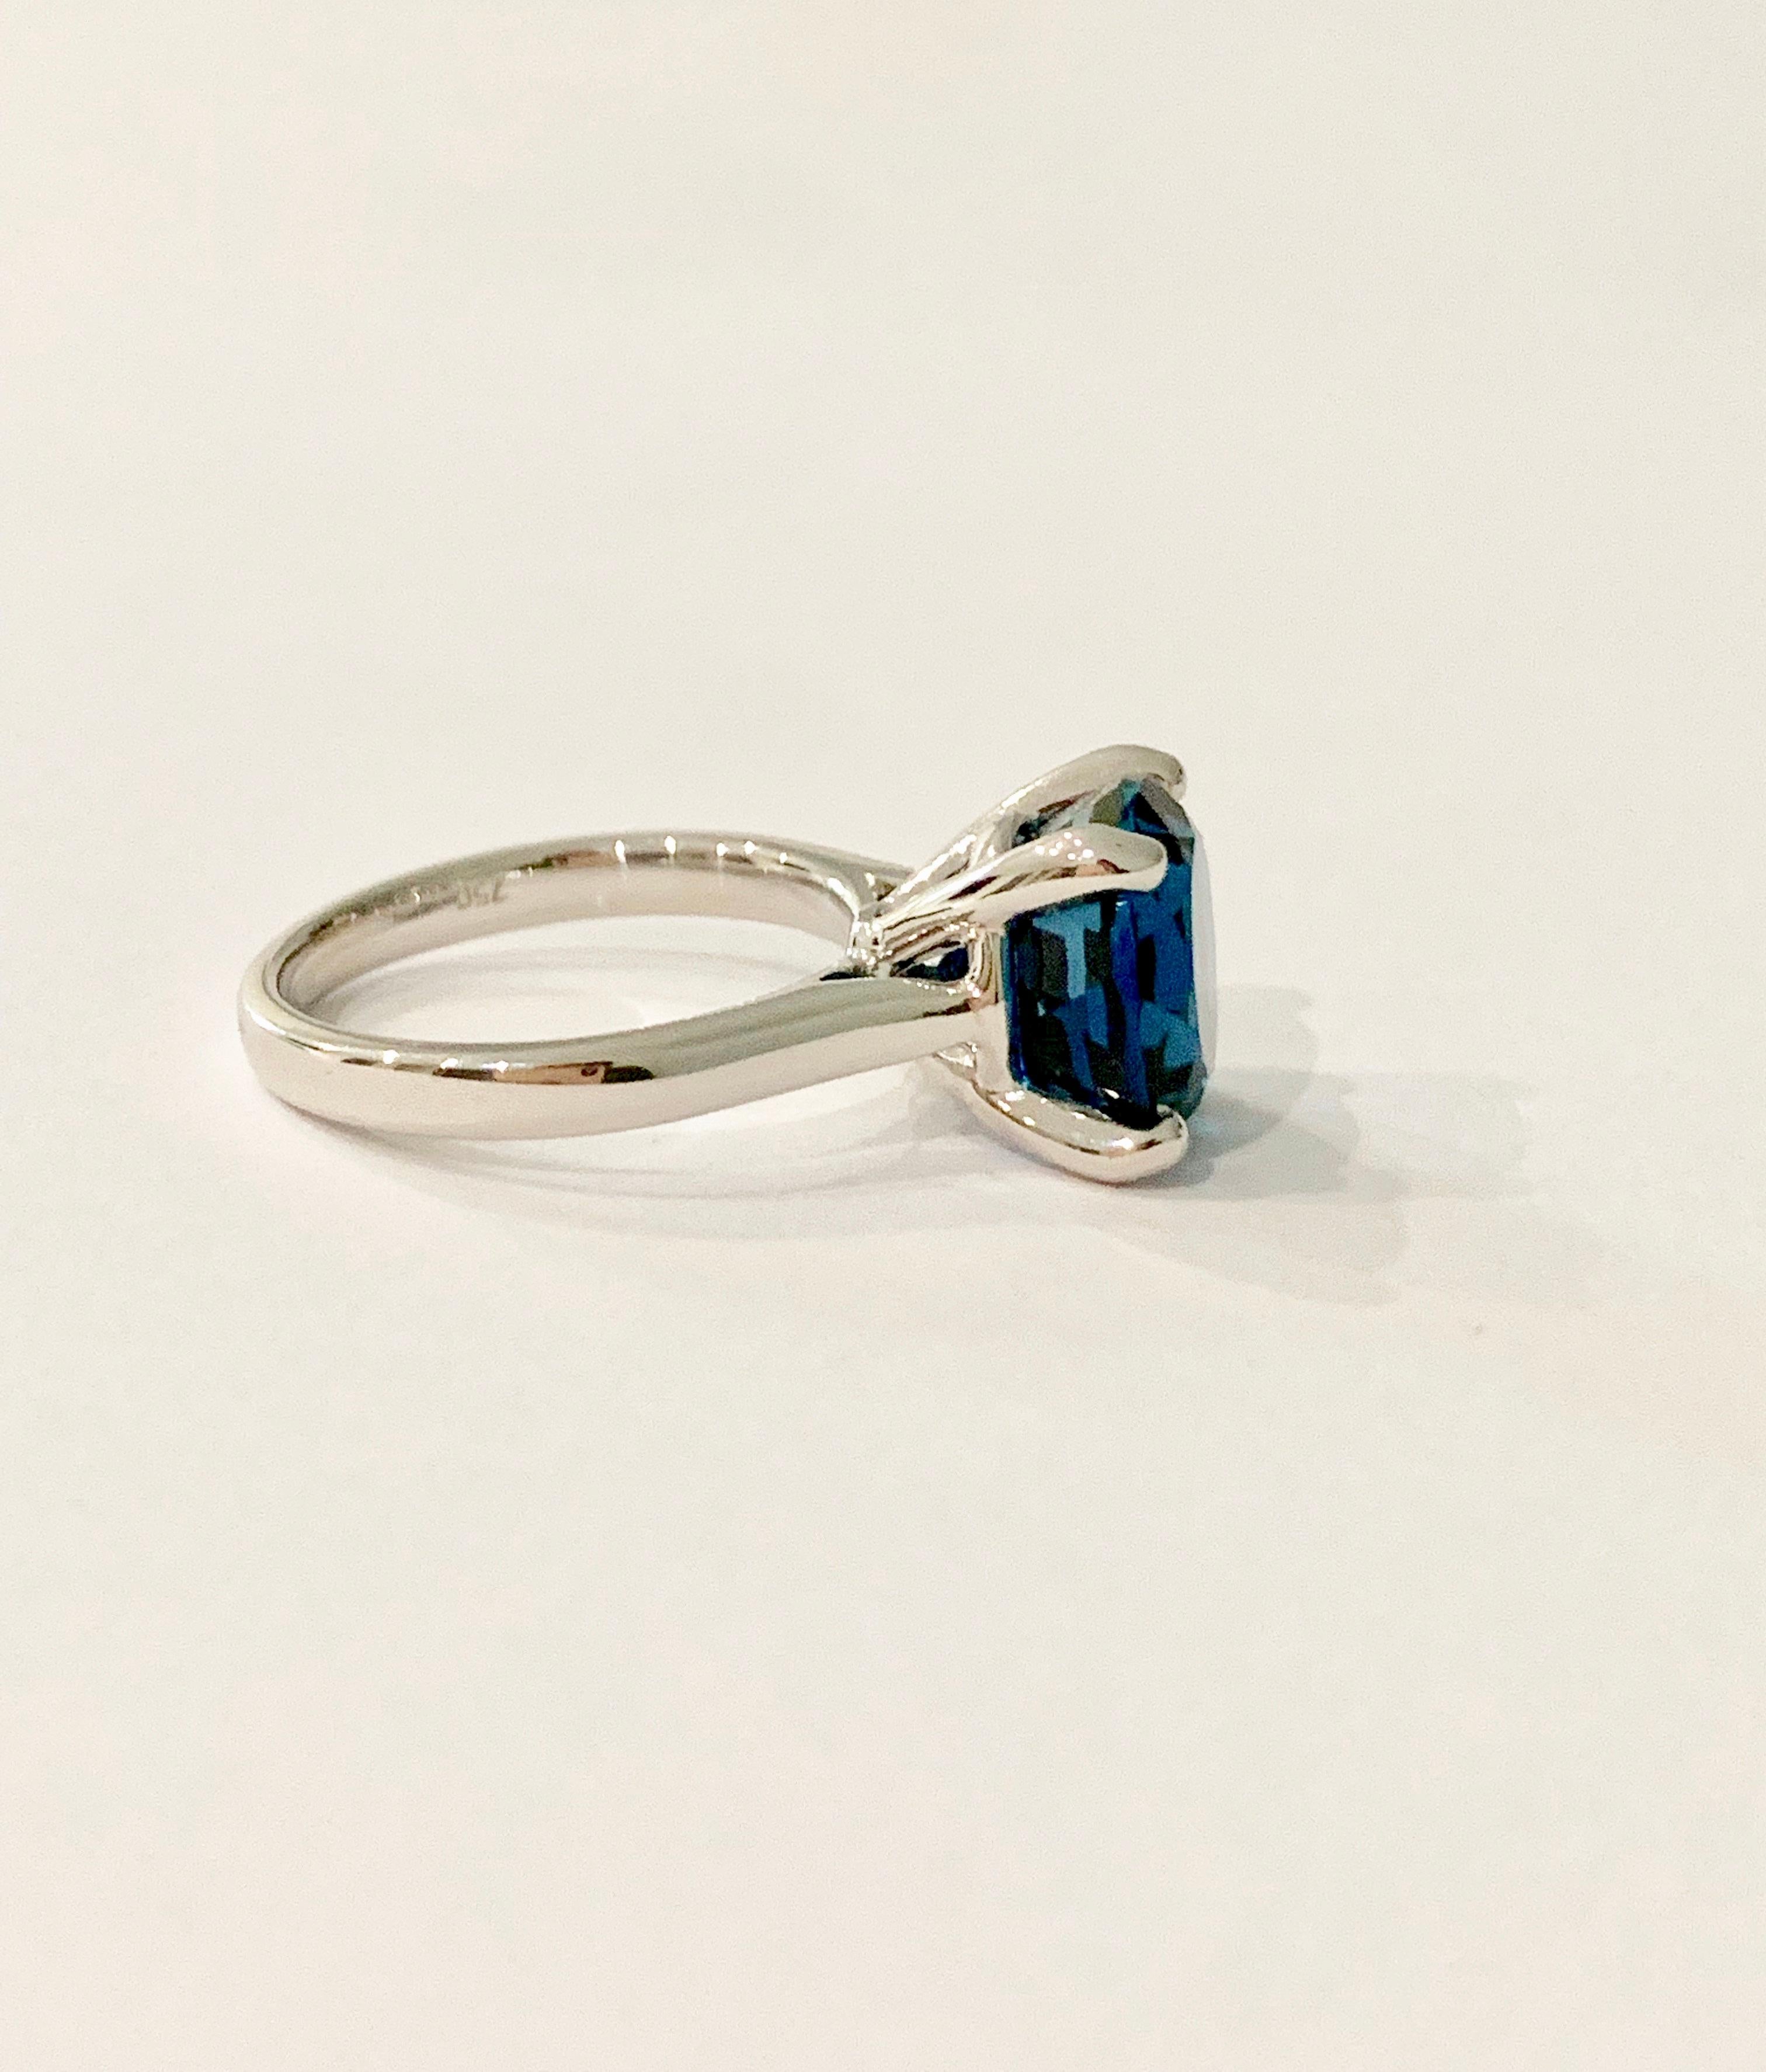 6.90 Carat Round Cut Premium London Blue Topaz Ring in 18 Carat White Gold In New Condition For Sale In Chislehurst, Kent